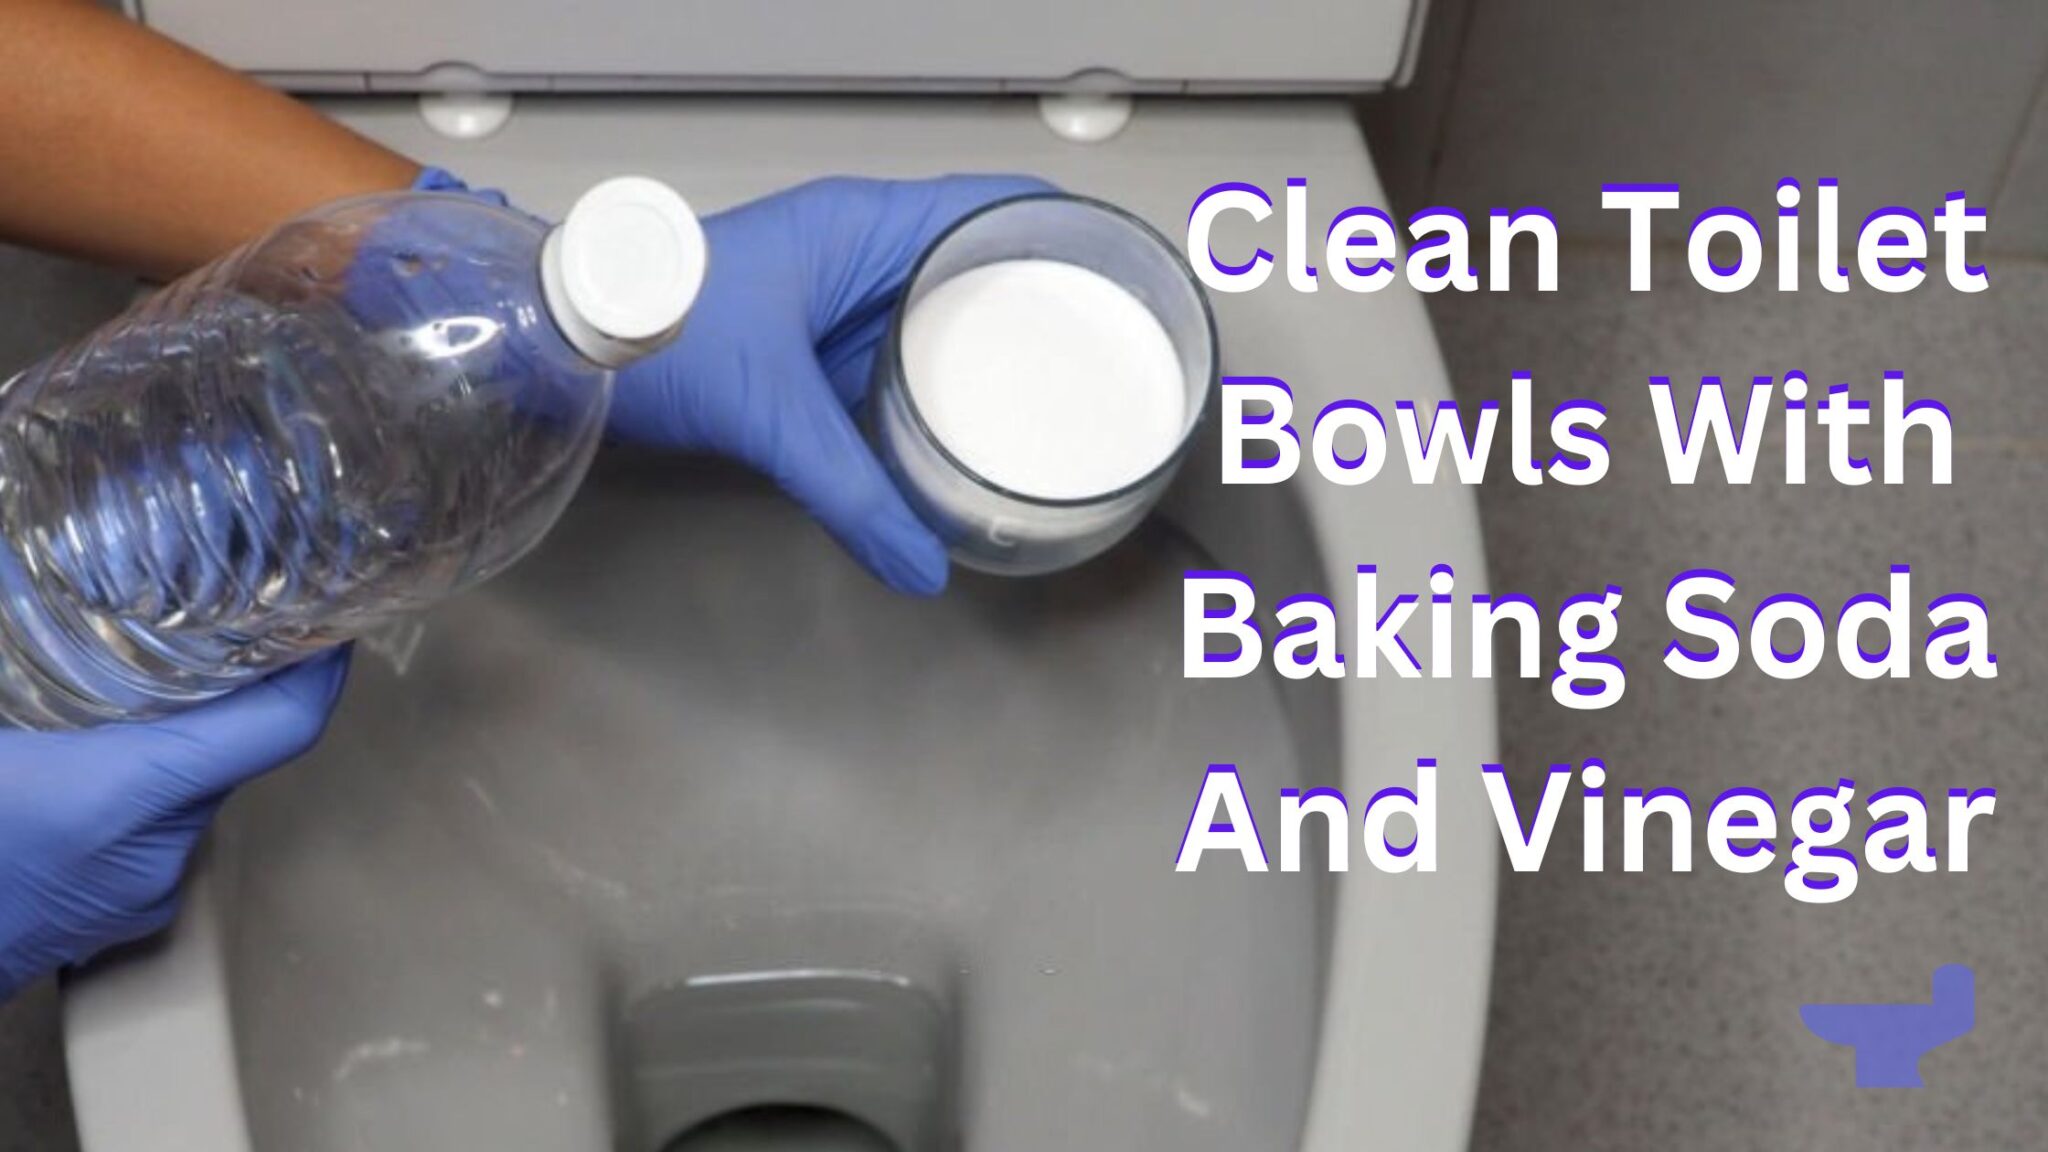 Clean Toilet Bowls With Baking Soda And Vinegar 2048x1152 